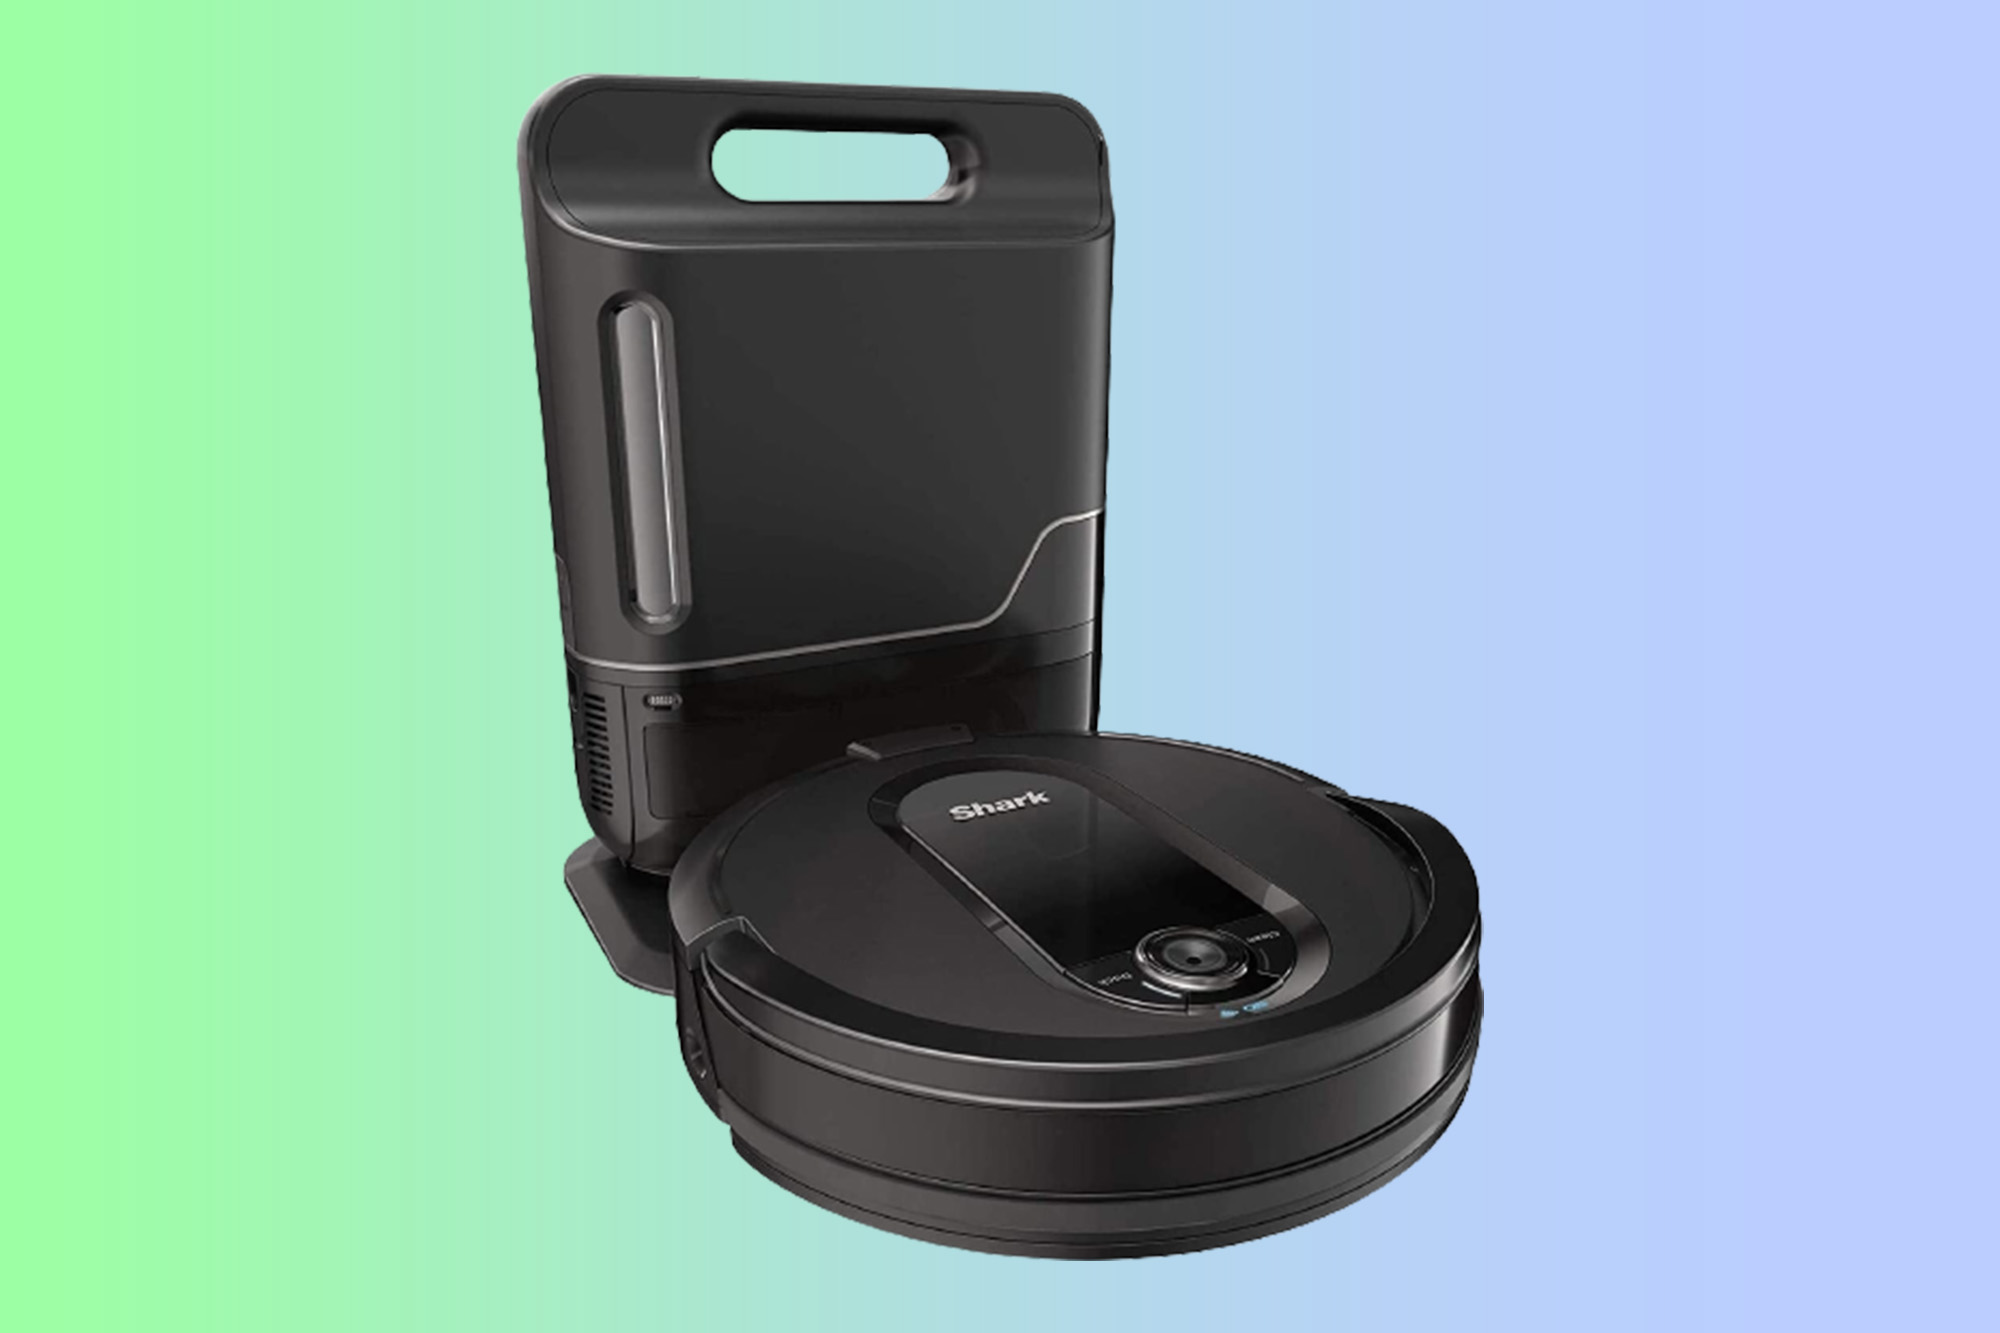 Save half off this Shark robot vacuum that self-empties everything but your wallet